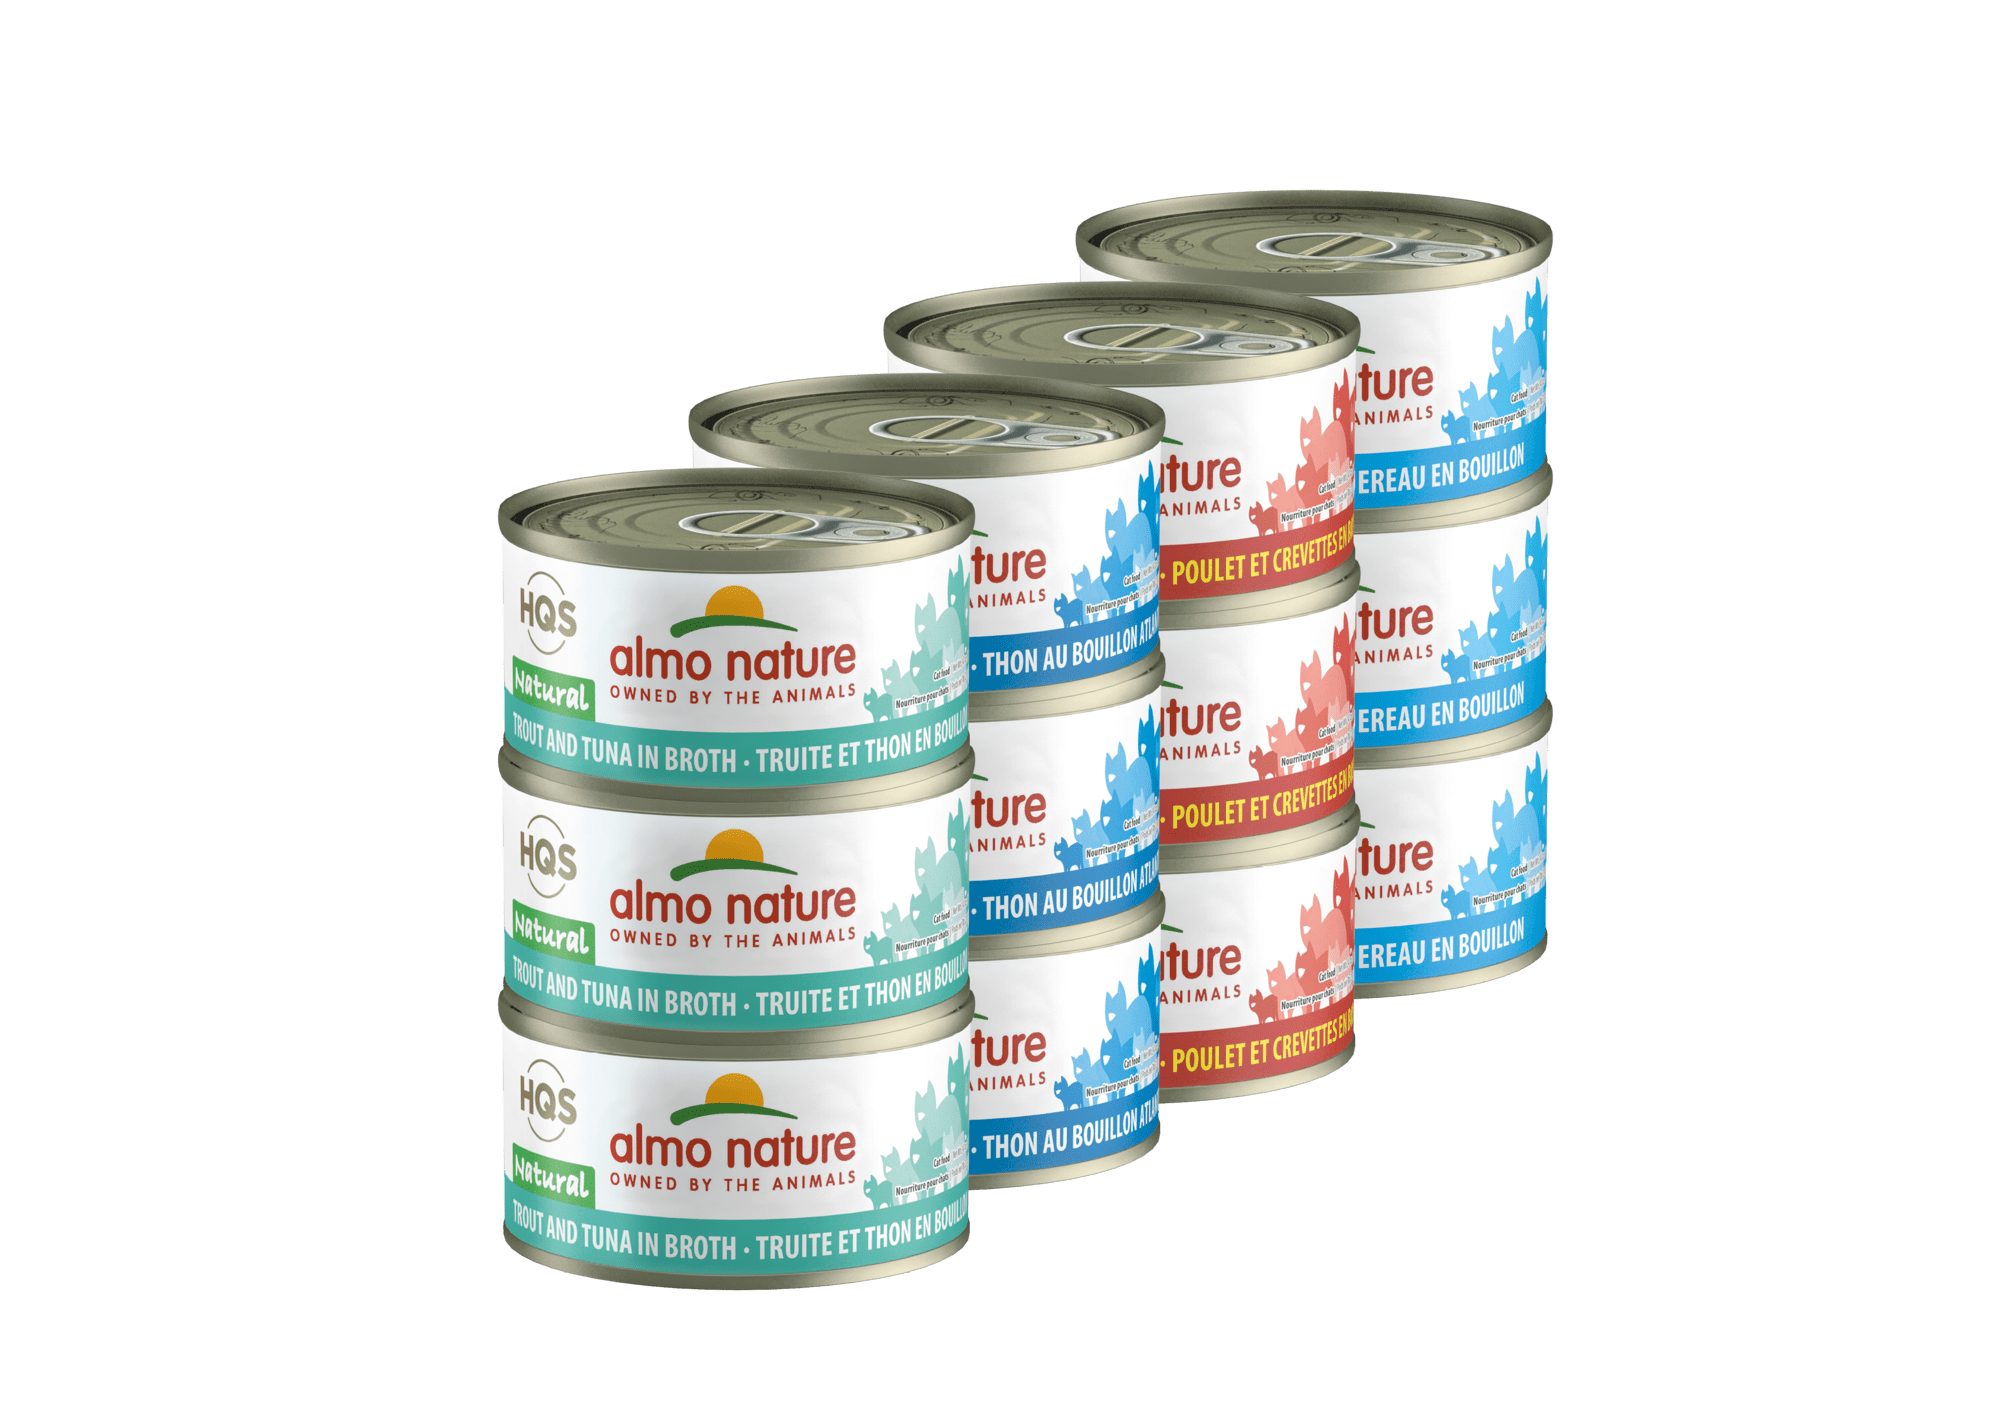 Photo 1 of Almo Nature Atlantic Tuna, Mackerel, Chicken & Shrimp, Trout & Tuna Variety Pack Canned Cat Food
EXP 12/21/2024